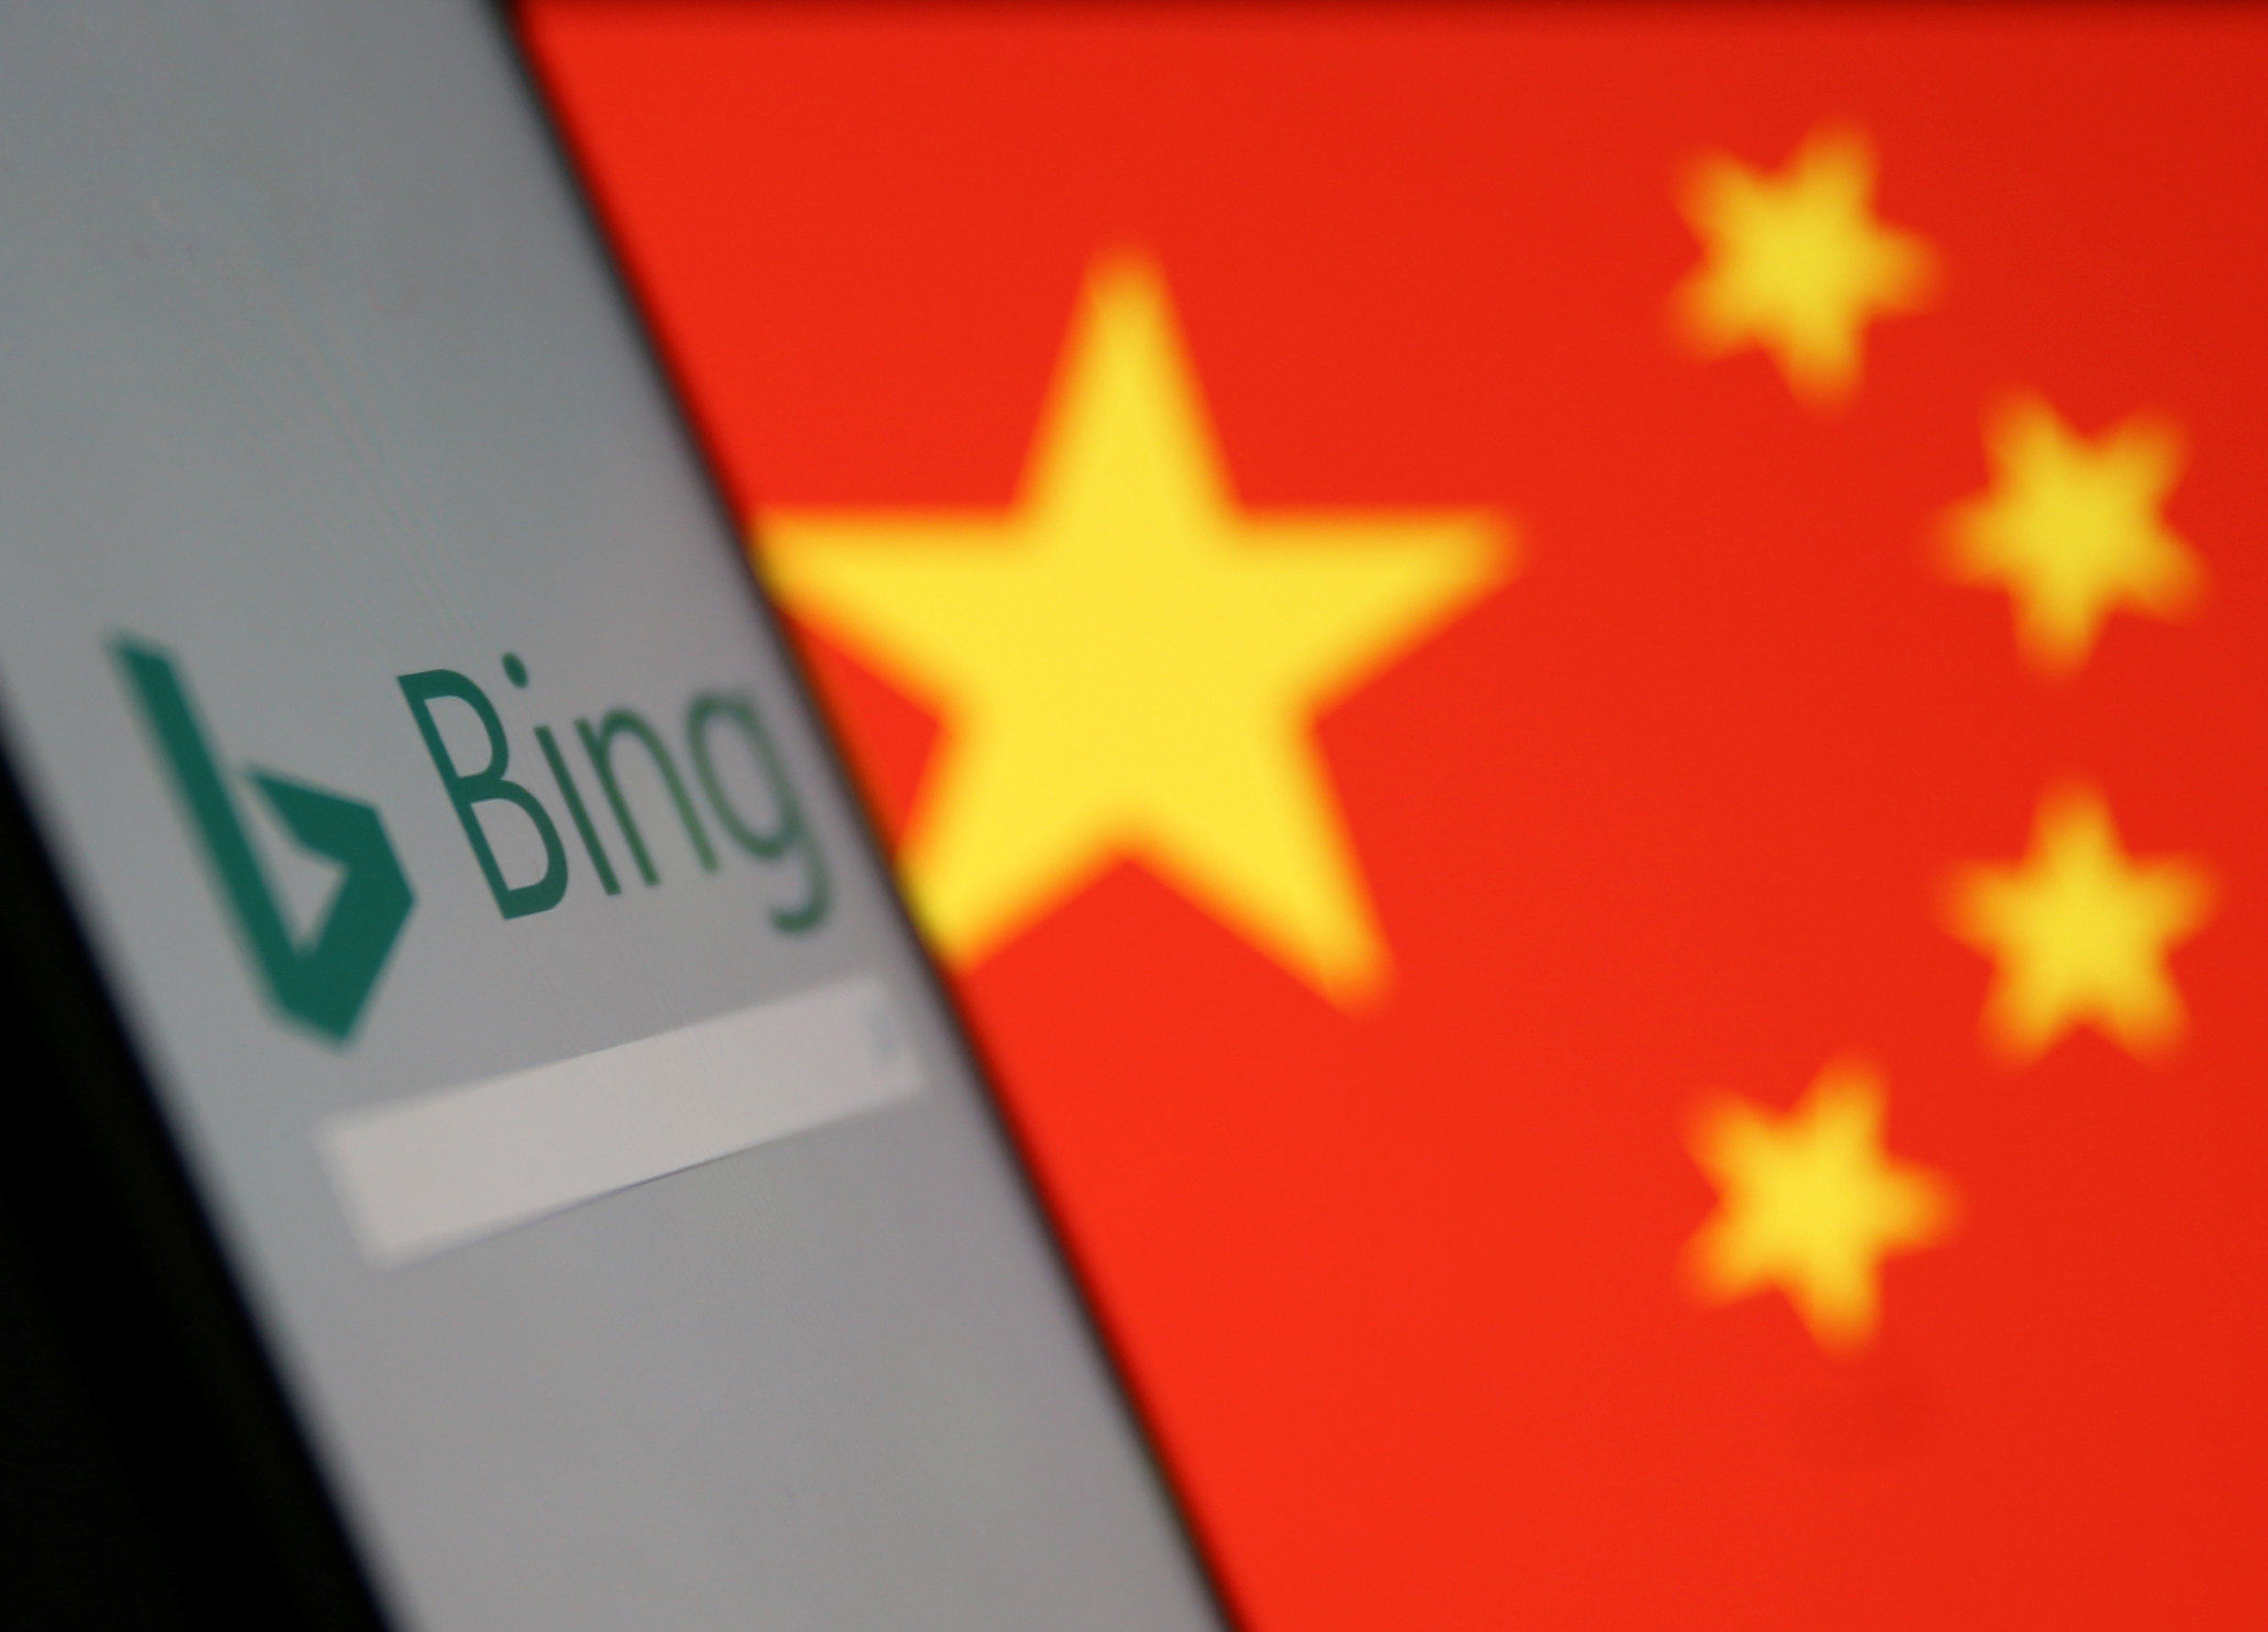 The Chinese government has ordered Microsoft to temporarily suspend the auto-suggest feature in the Bing search engine. Photo: Reuters